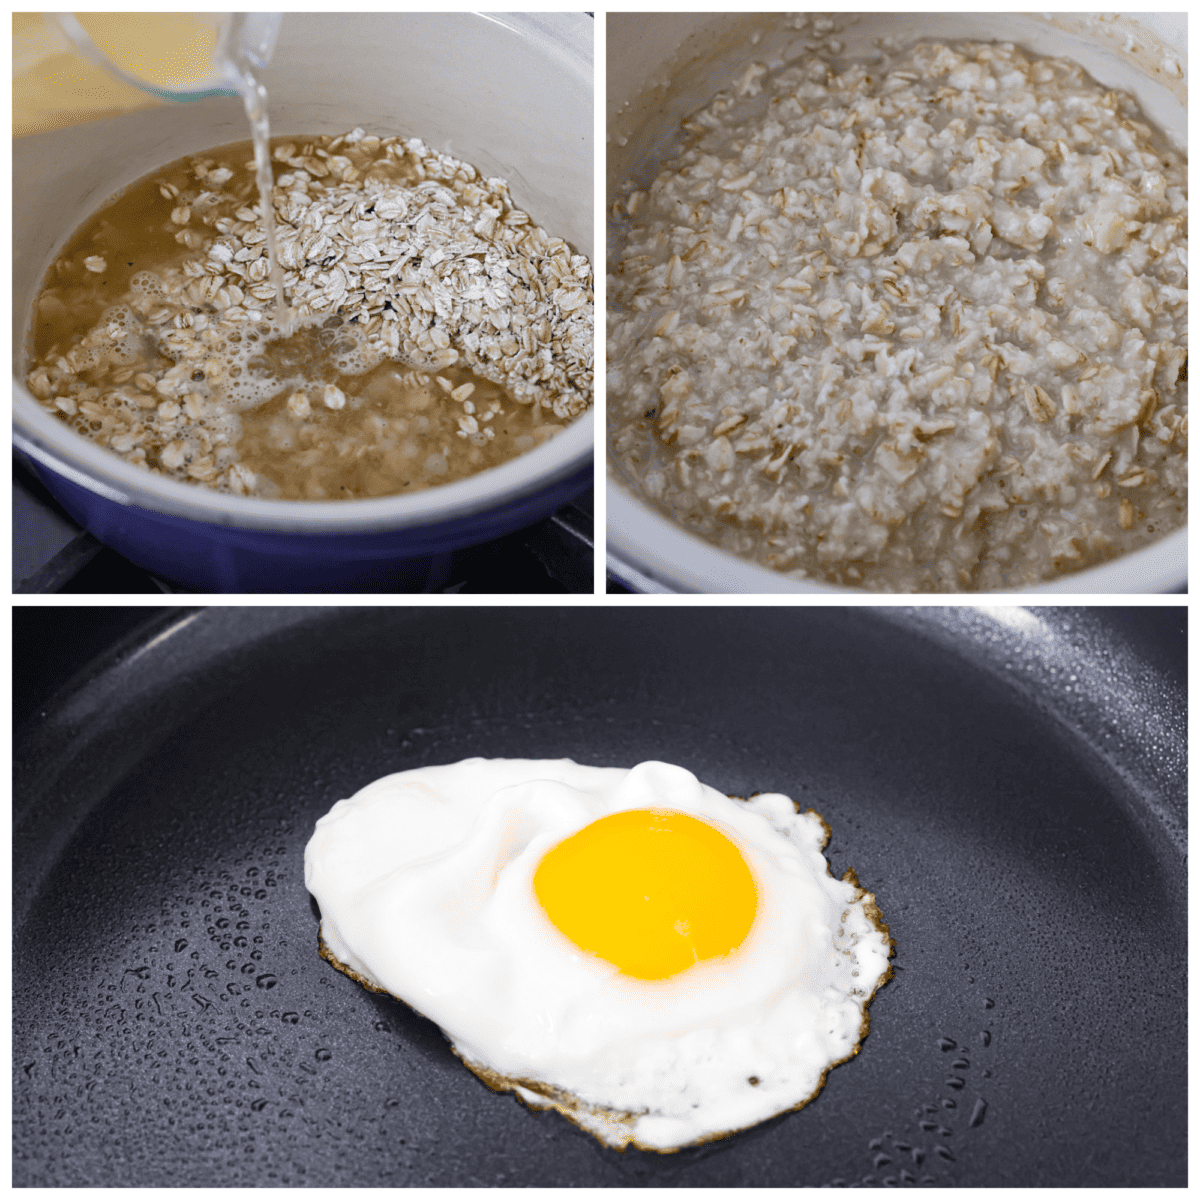 3 photos showing how to cook the ingredients before combing everything. 